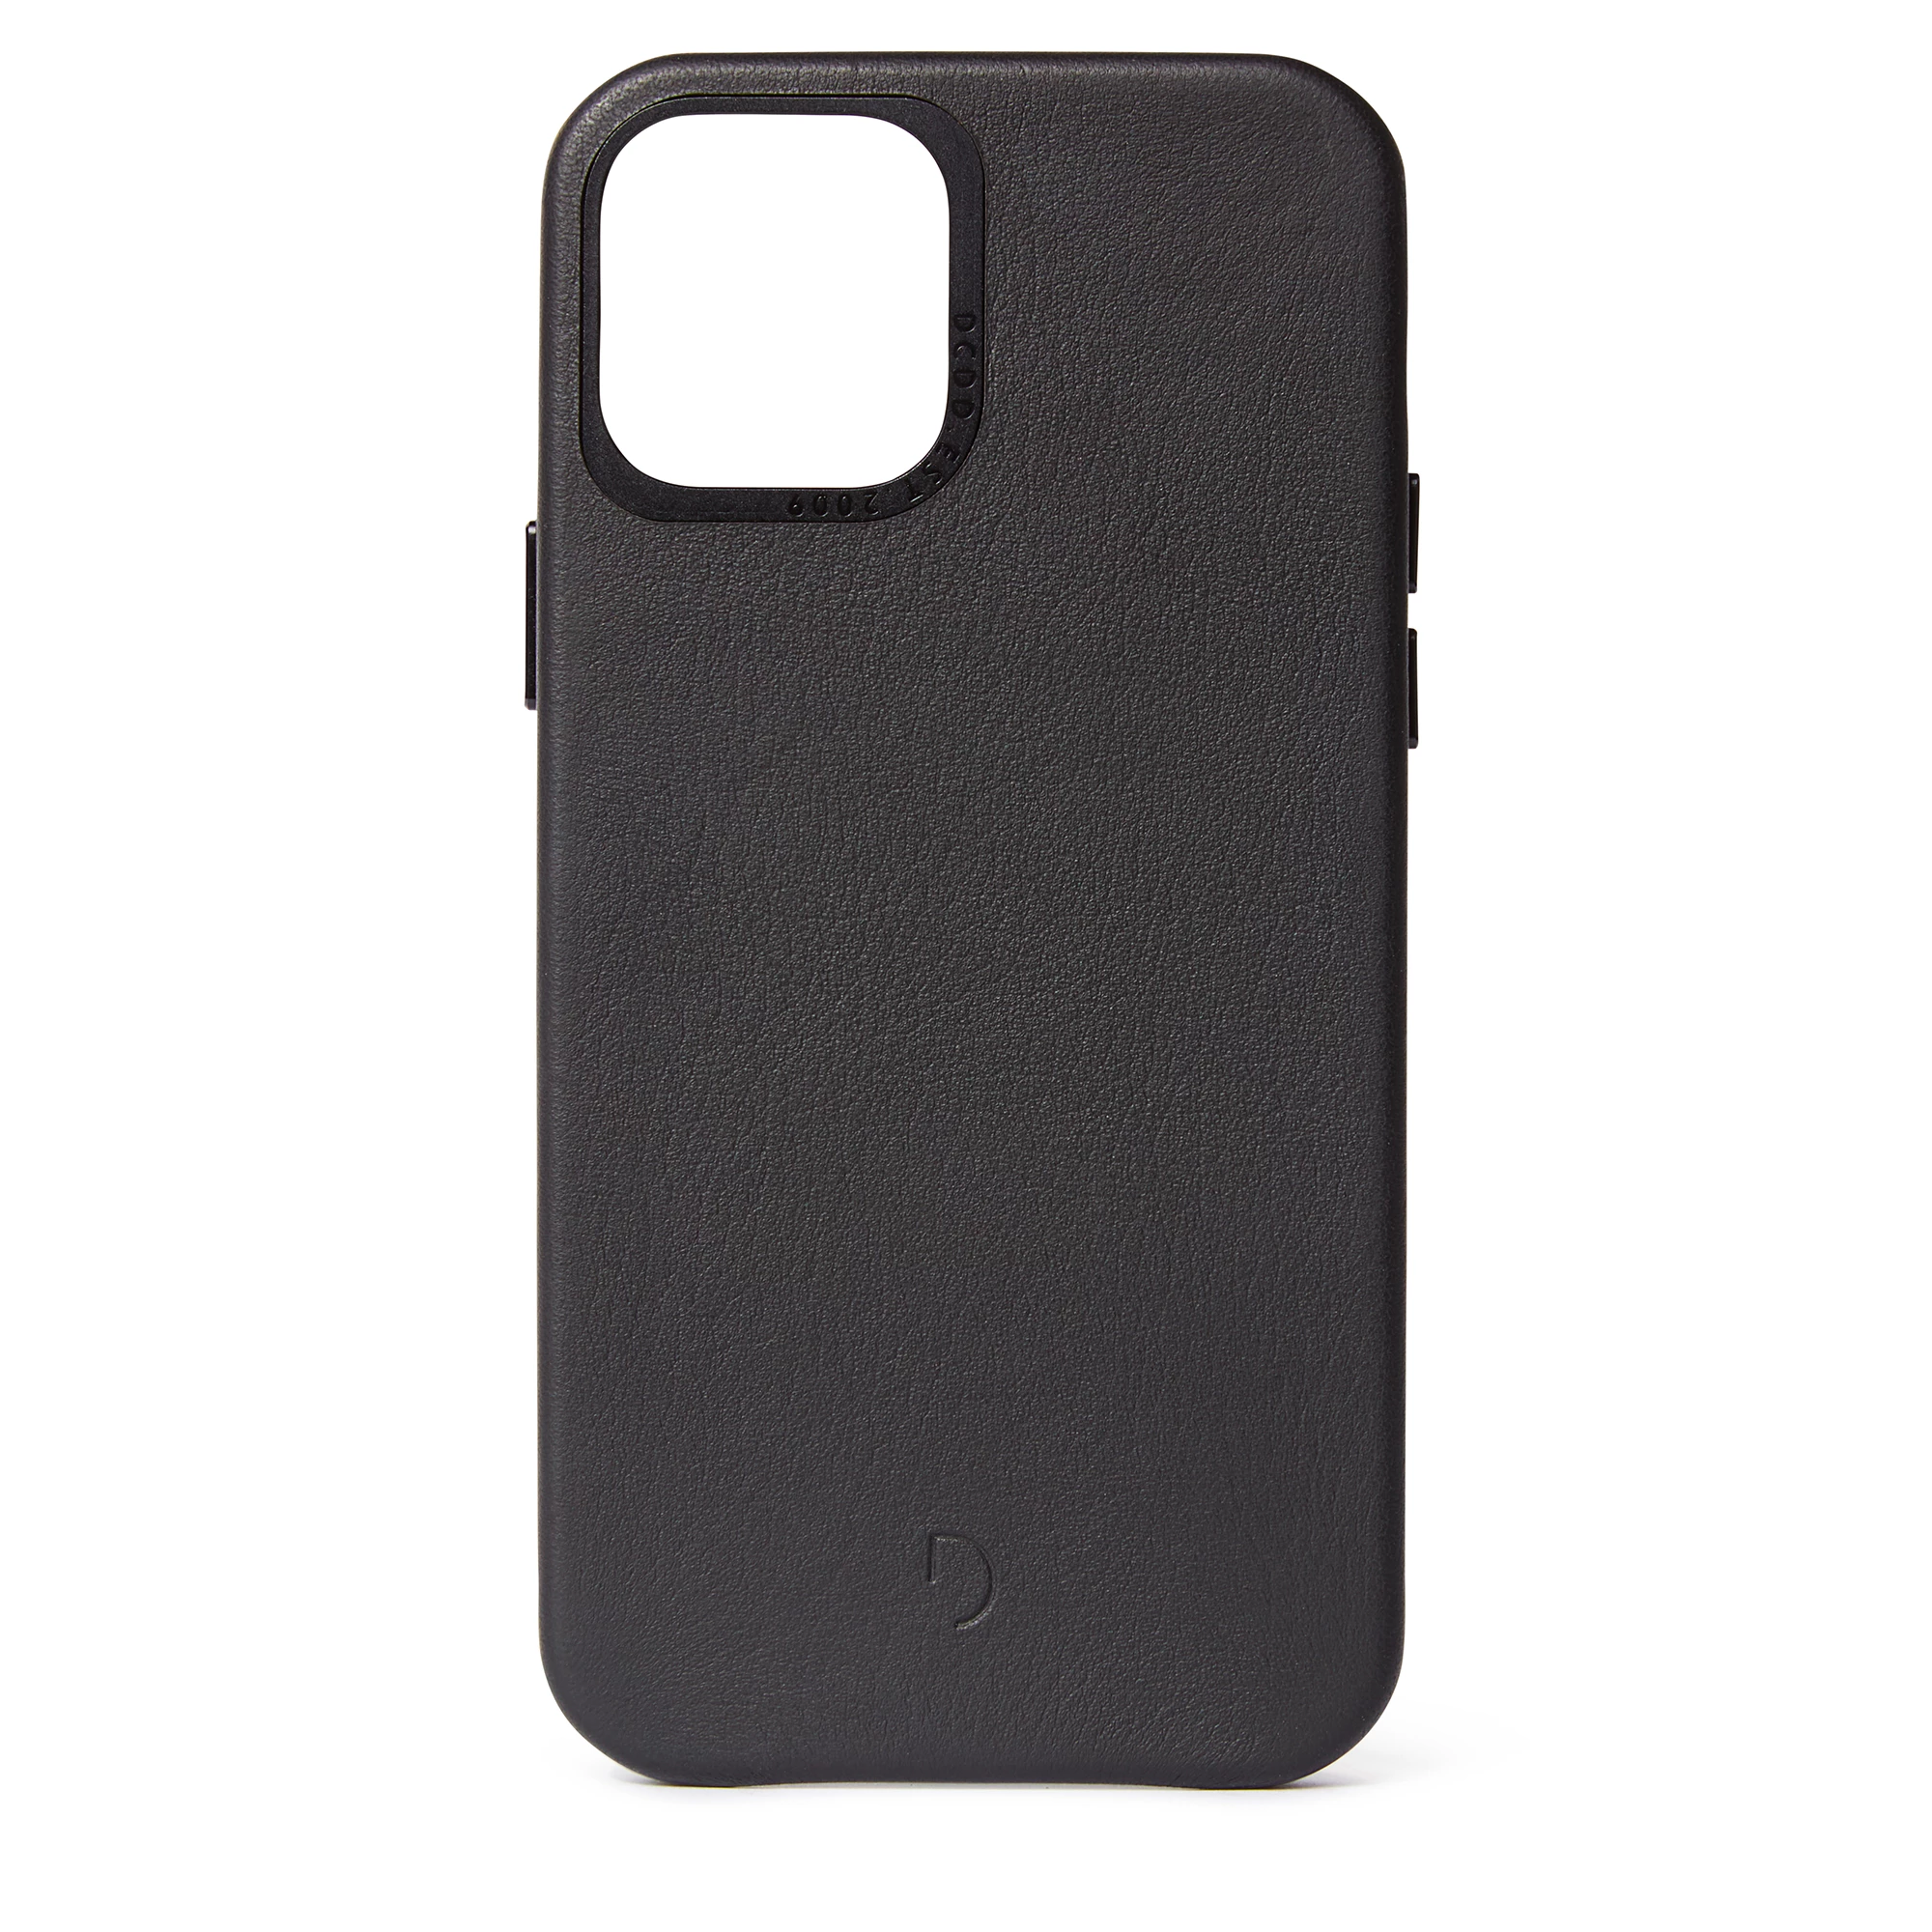 DECODED Leather Back Cover for iPhone 12 Pro - Black (D20IPO61BC2BK)